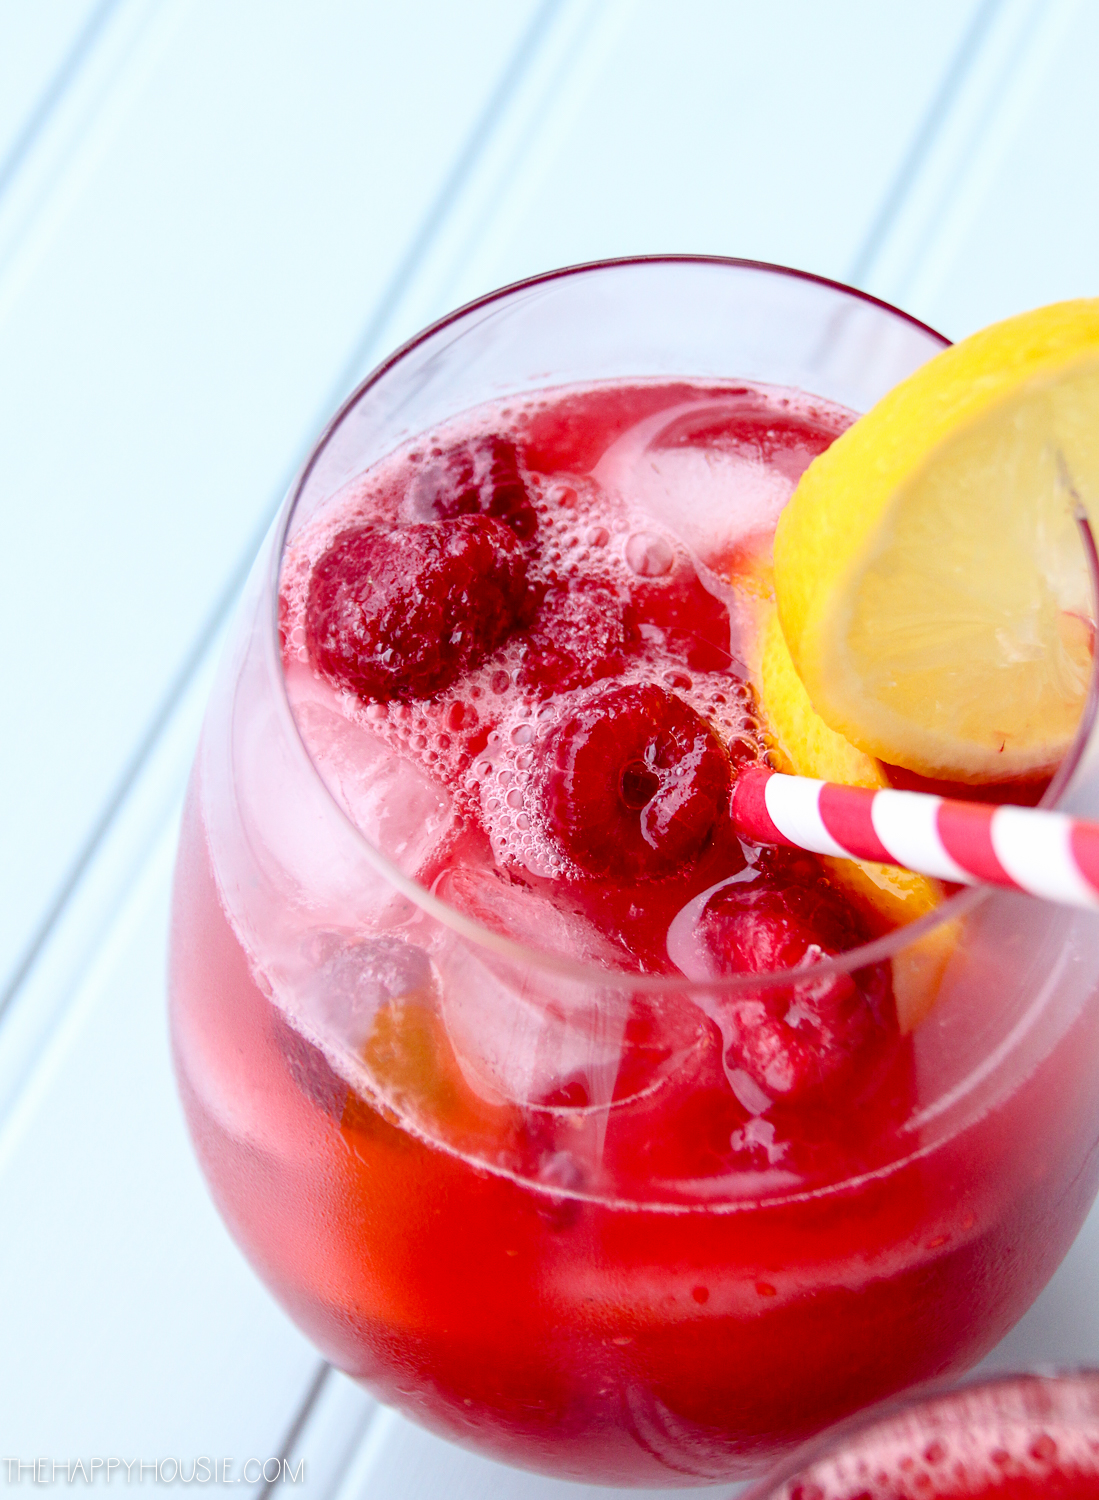 Raspberries in the sangria with a straw.